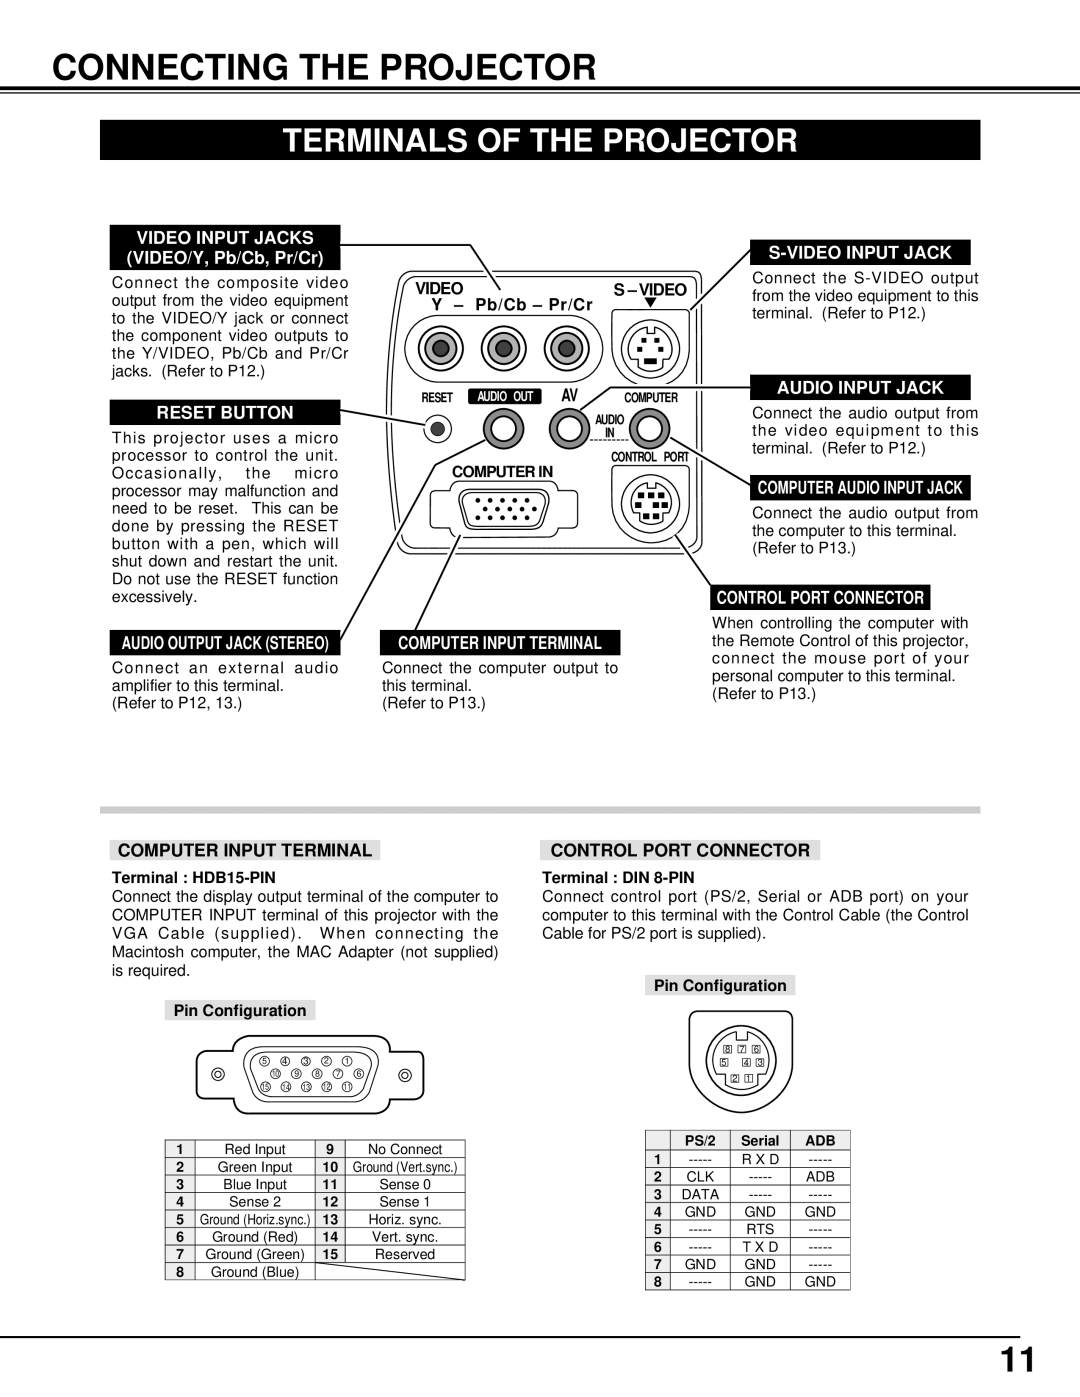 Canon 5100 owner manual Connecting The Projector, Terminals Of The Projector, Pb/Cb - Pr/Cr, Computer Input Terminal 